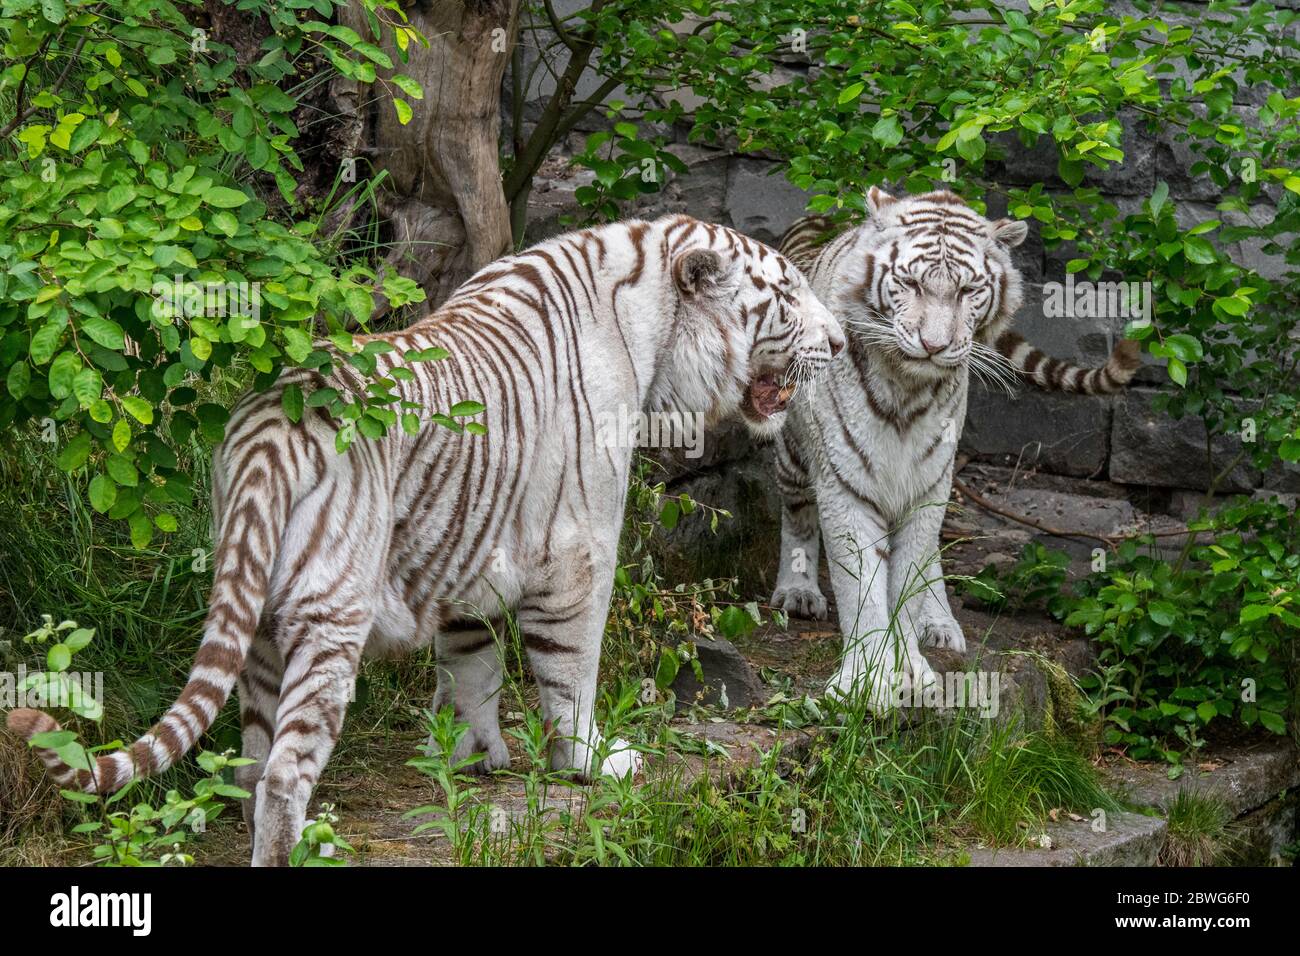 Two white tigers / bleached tiger pair (Panthera tigris) pigmentation variant of the Bengal tiger, male meeting female, native to India Stock Photo